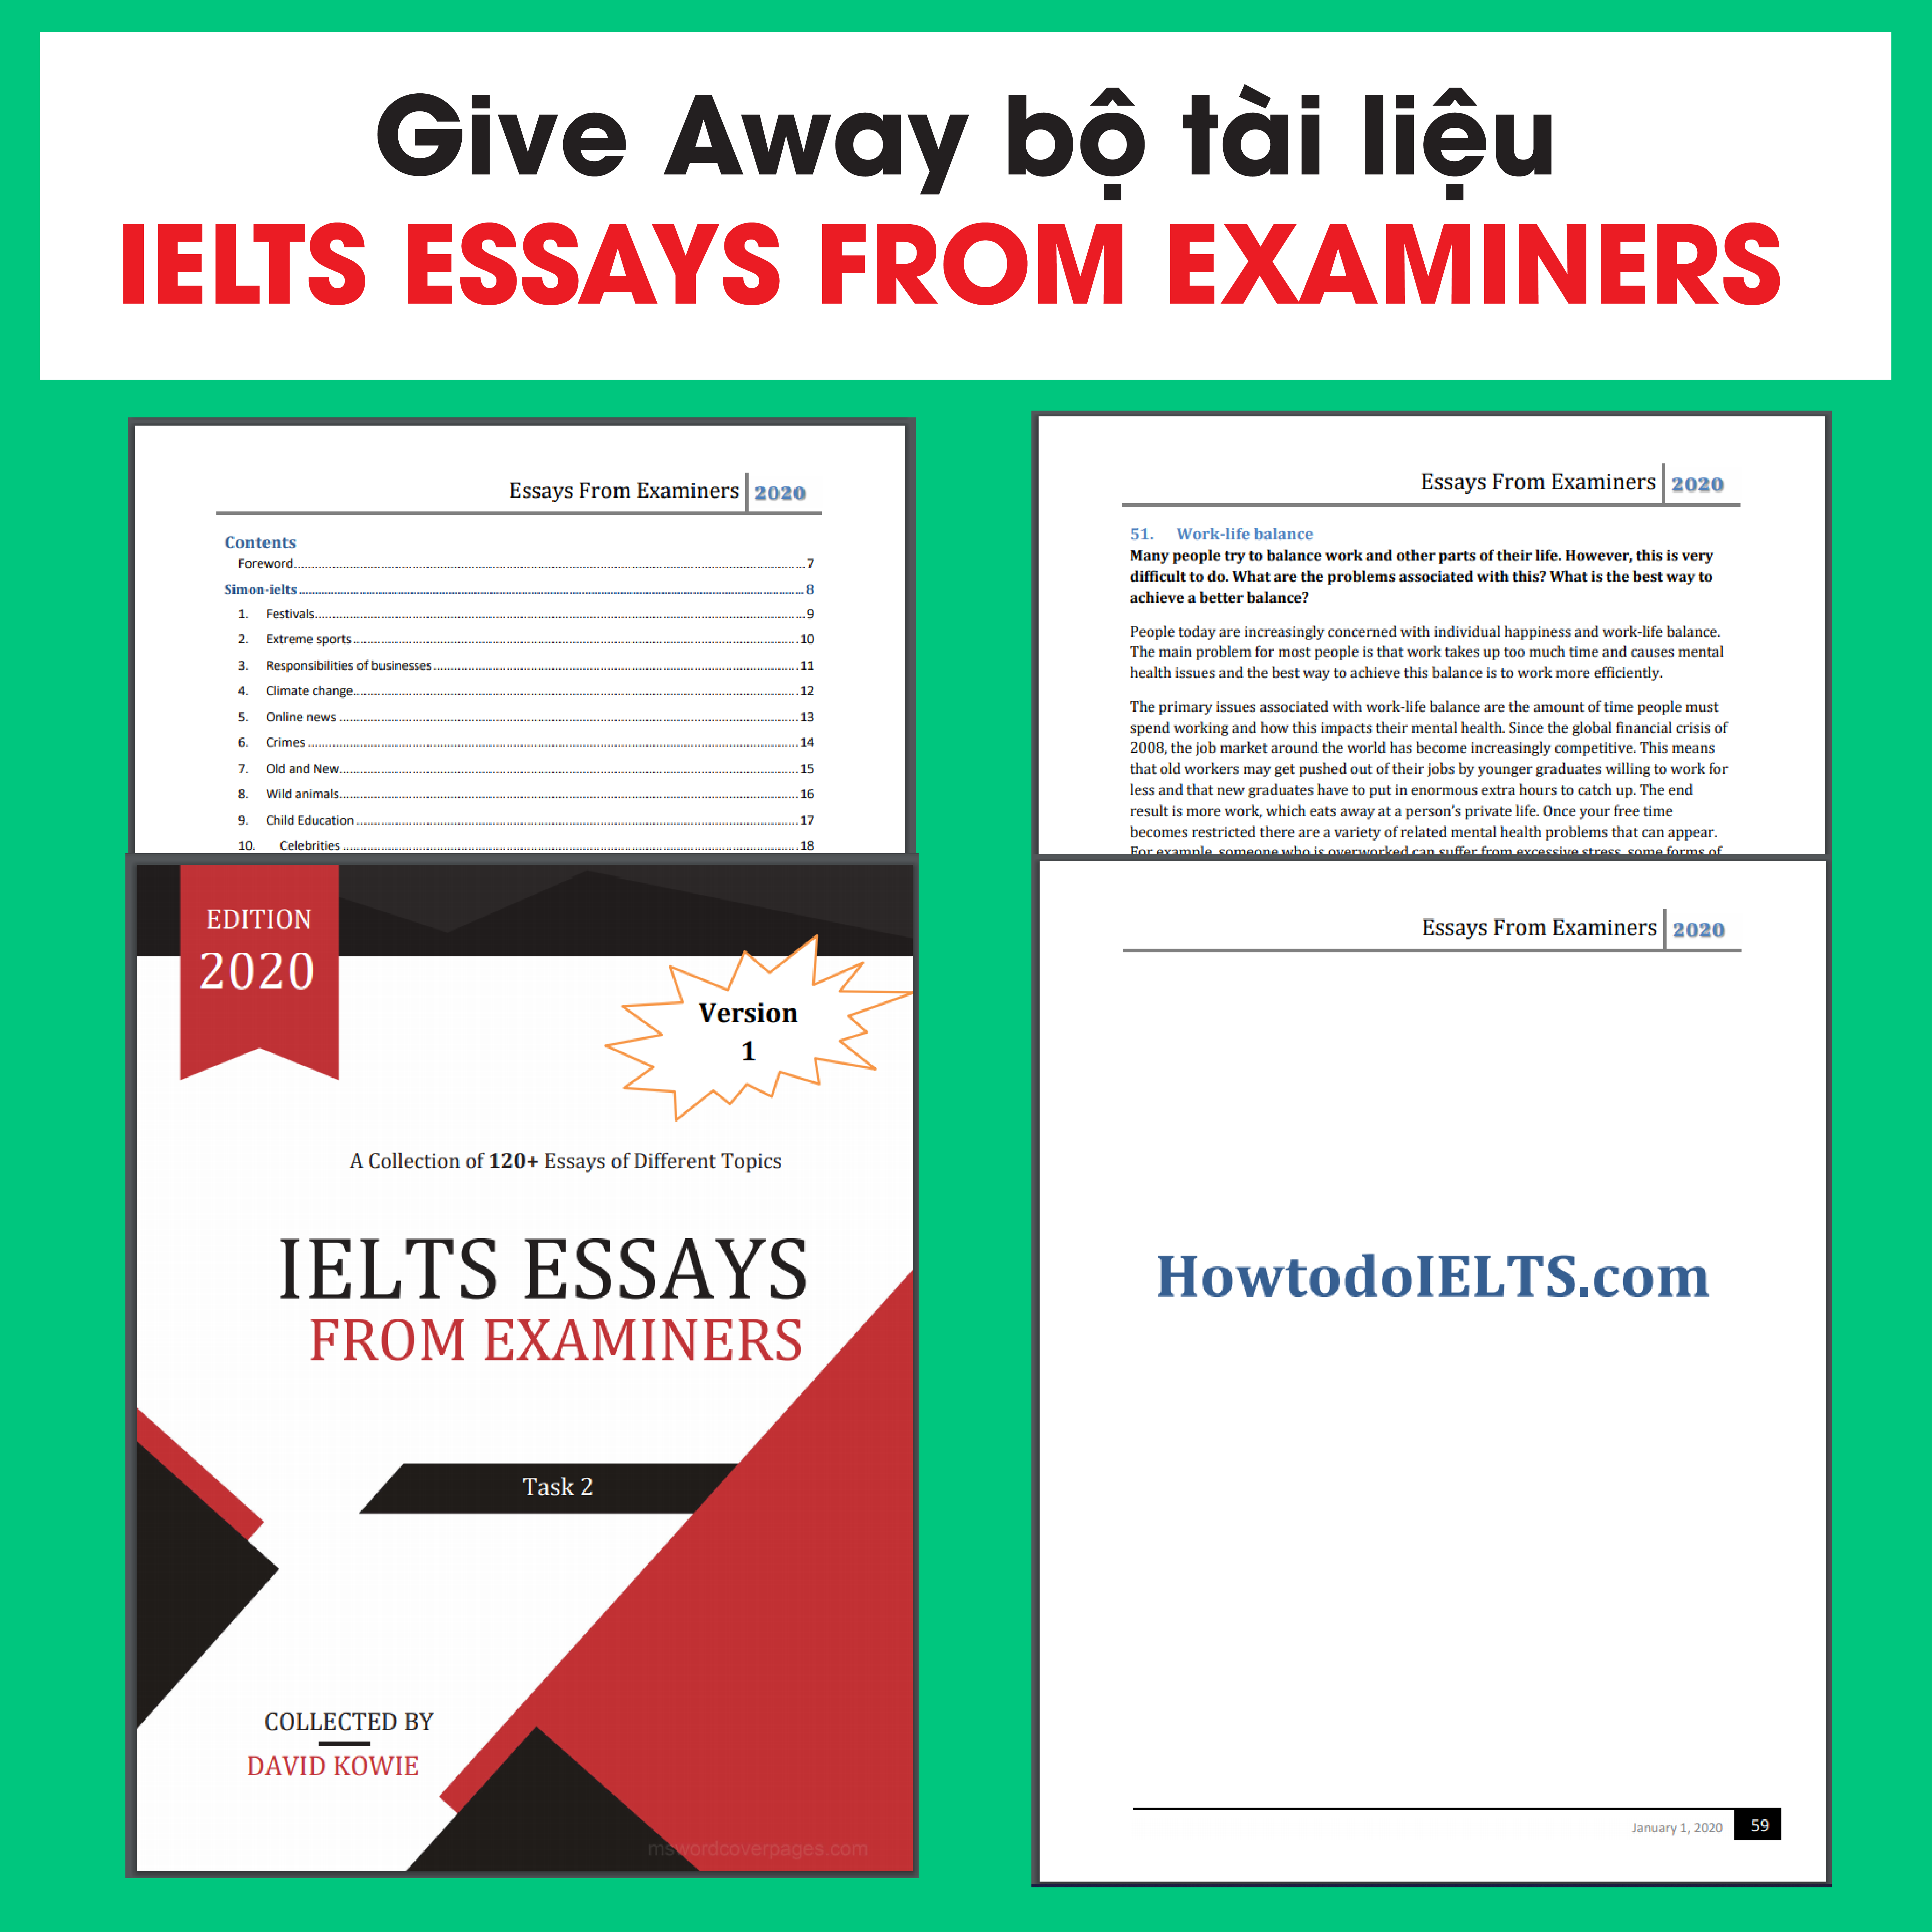 ielts essays from examiners 2020